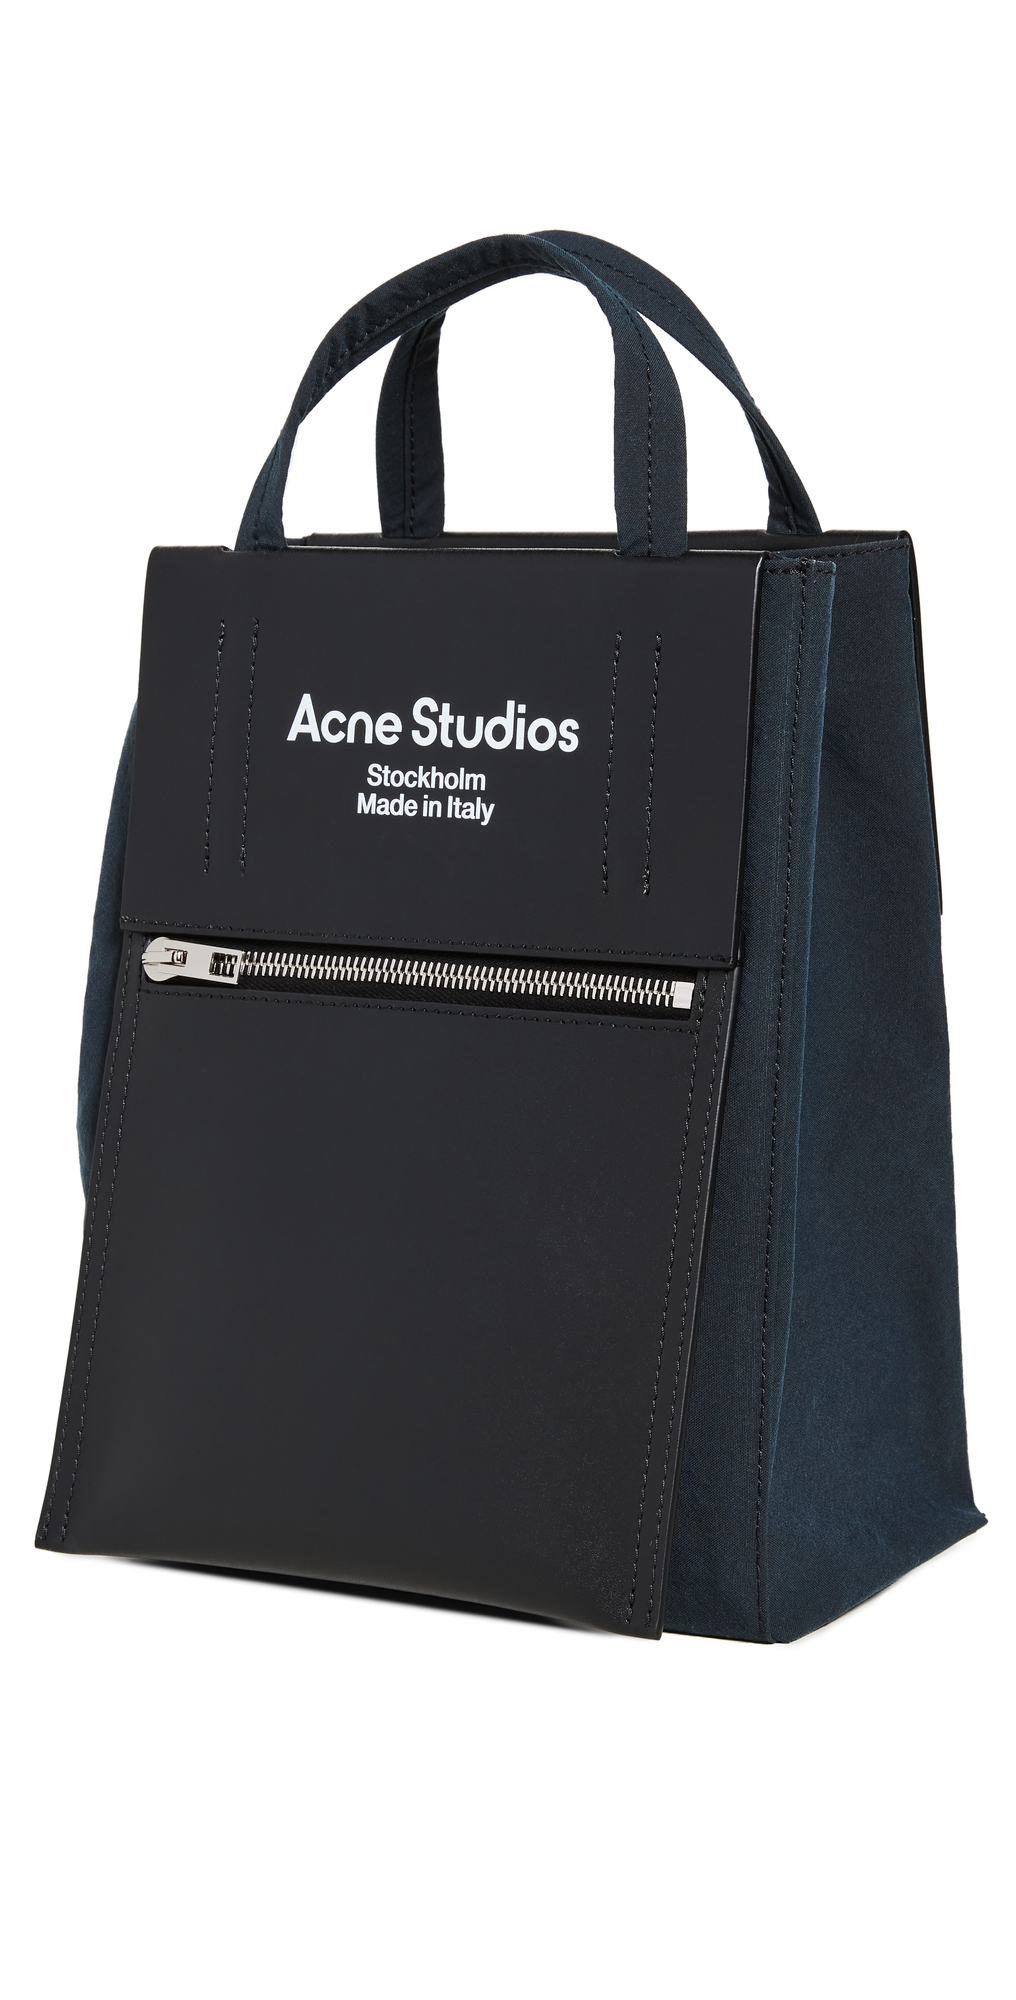 Acne Studios Baker Out Small Tote in black